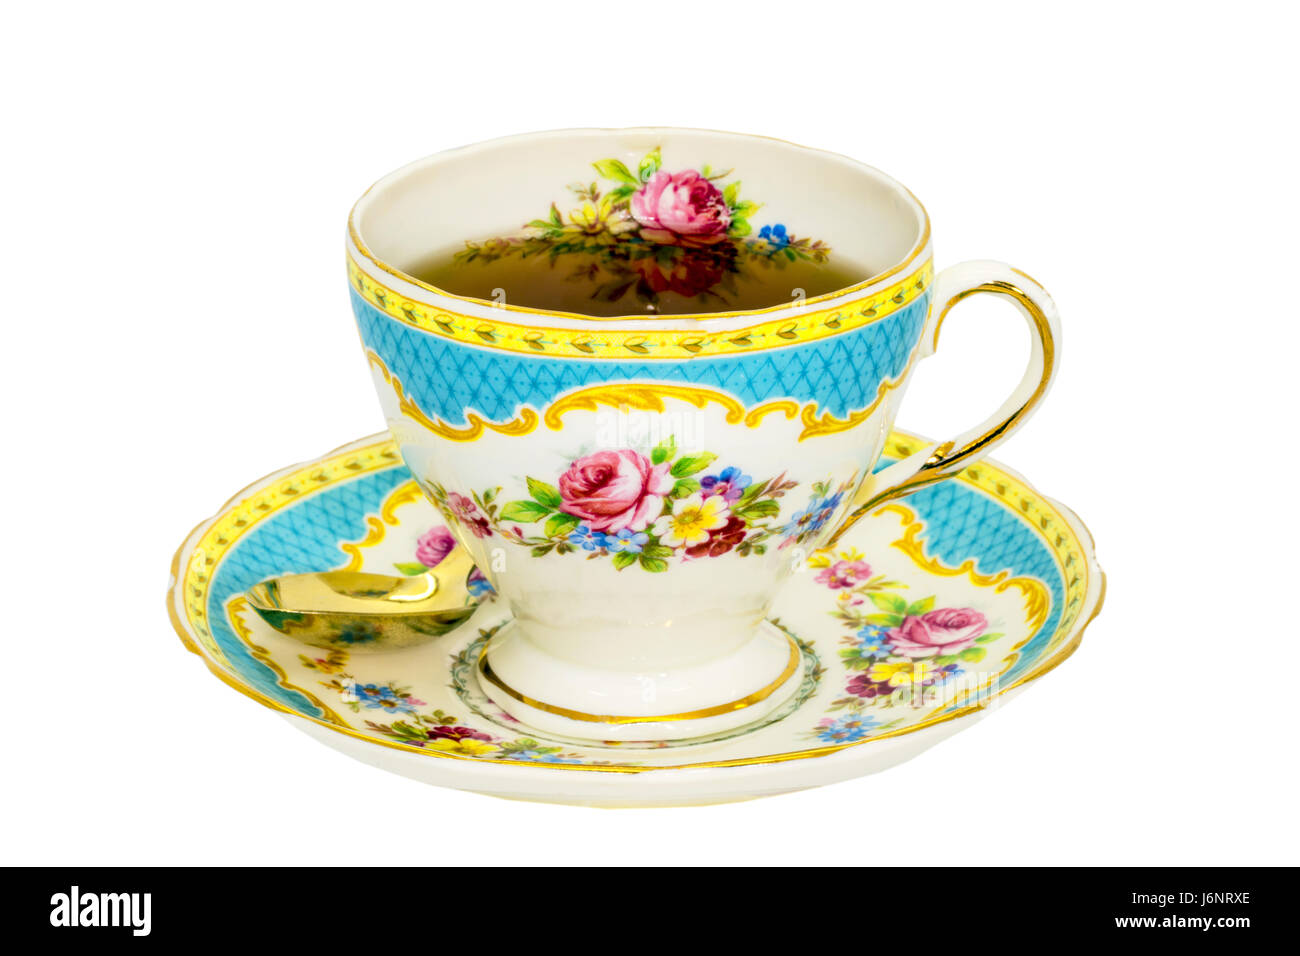 Vintage fine china tea cup and saucer with tea isolated on white. Stock Photo